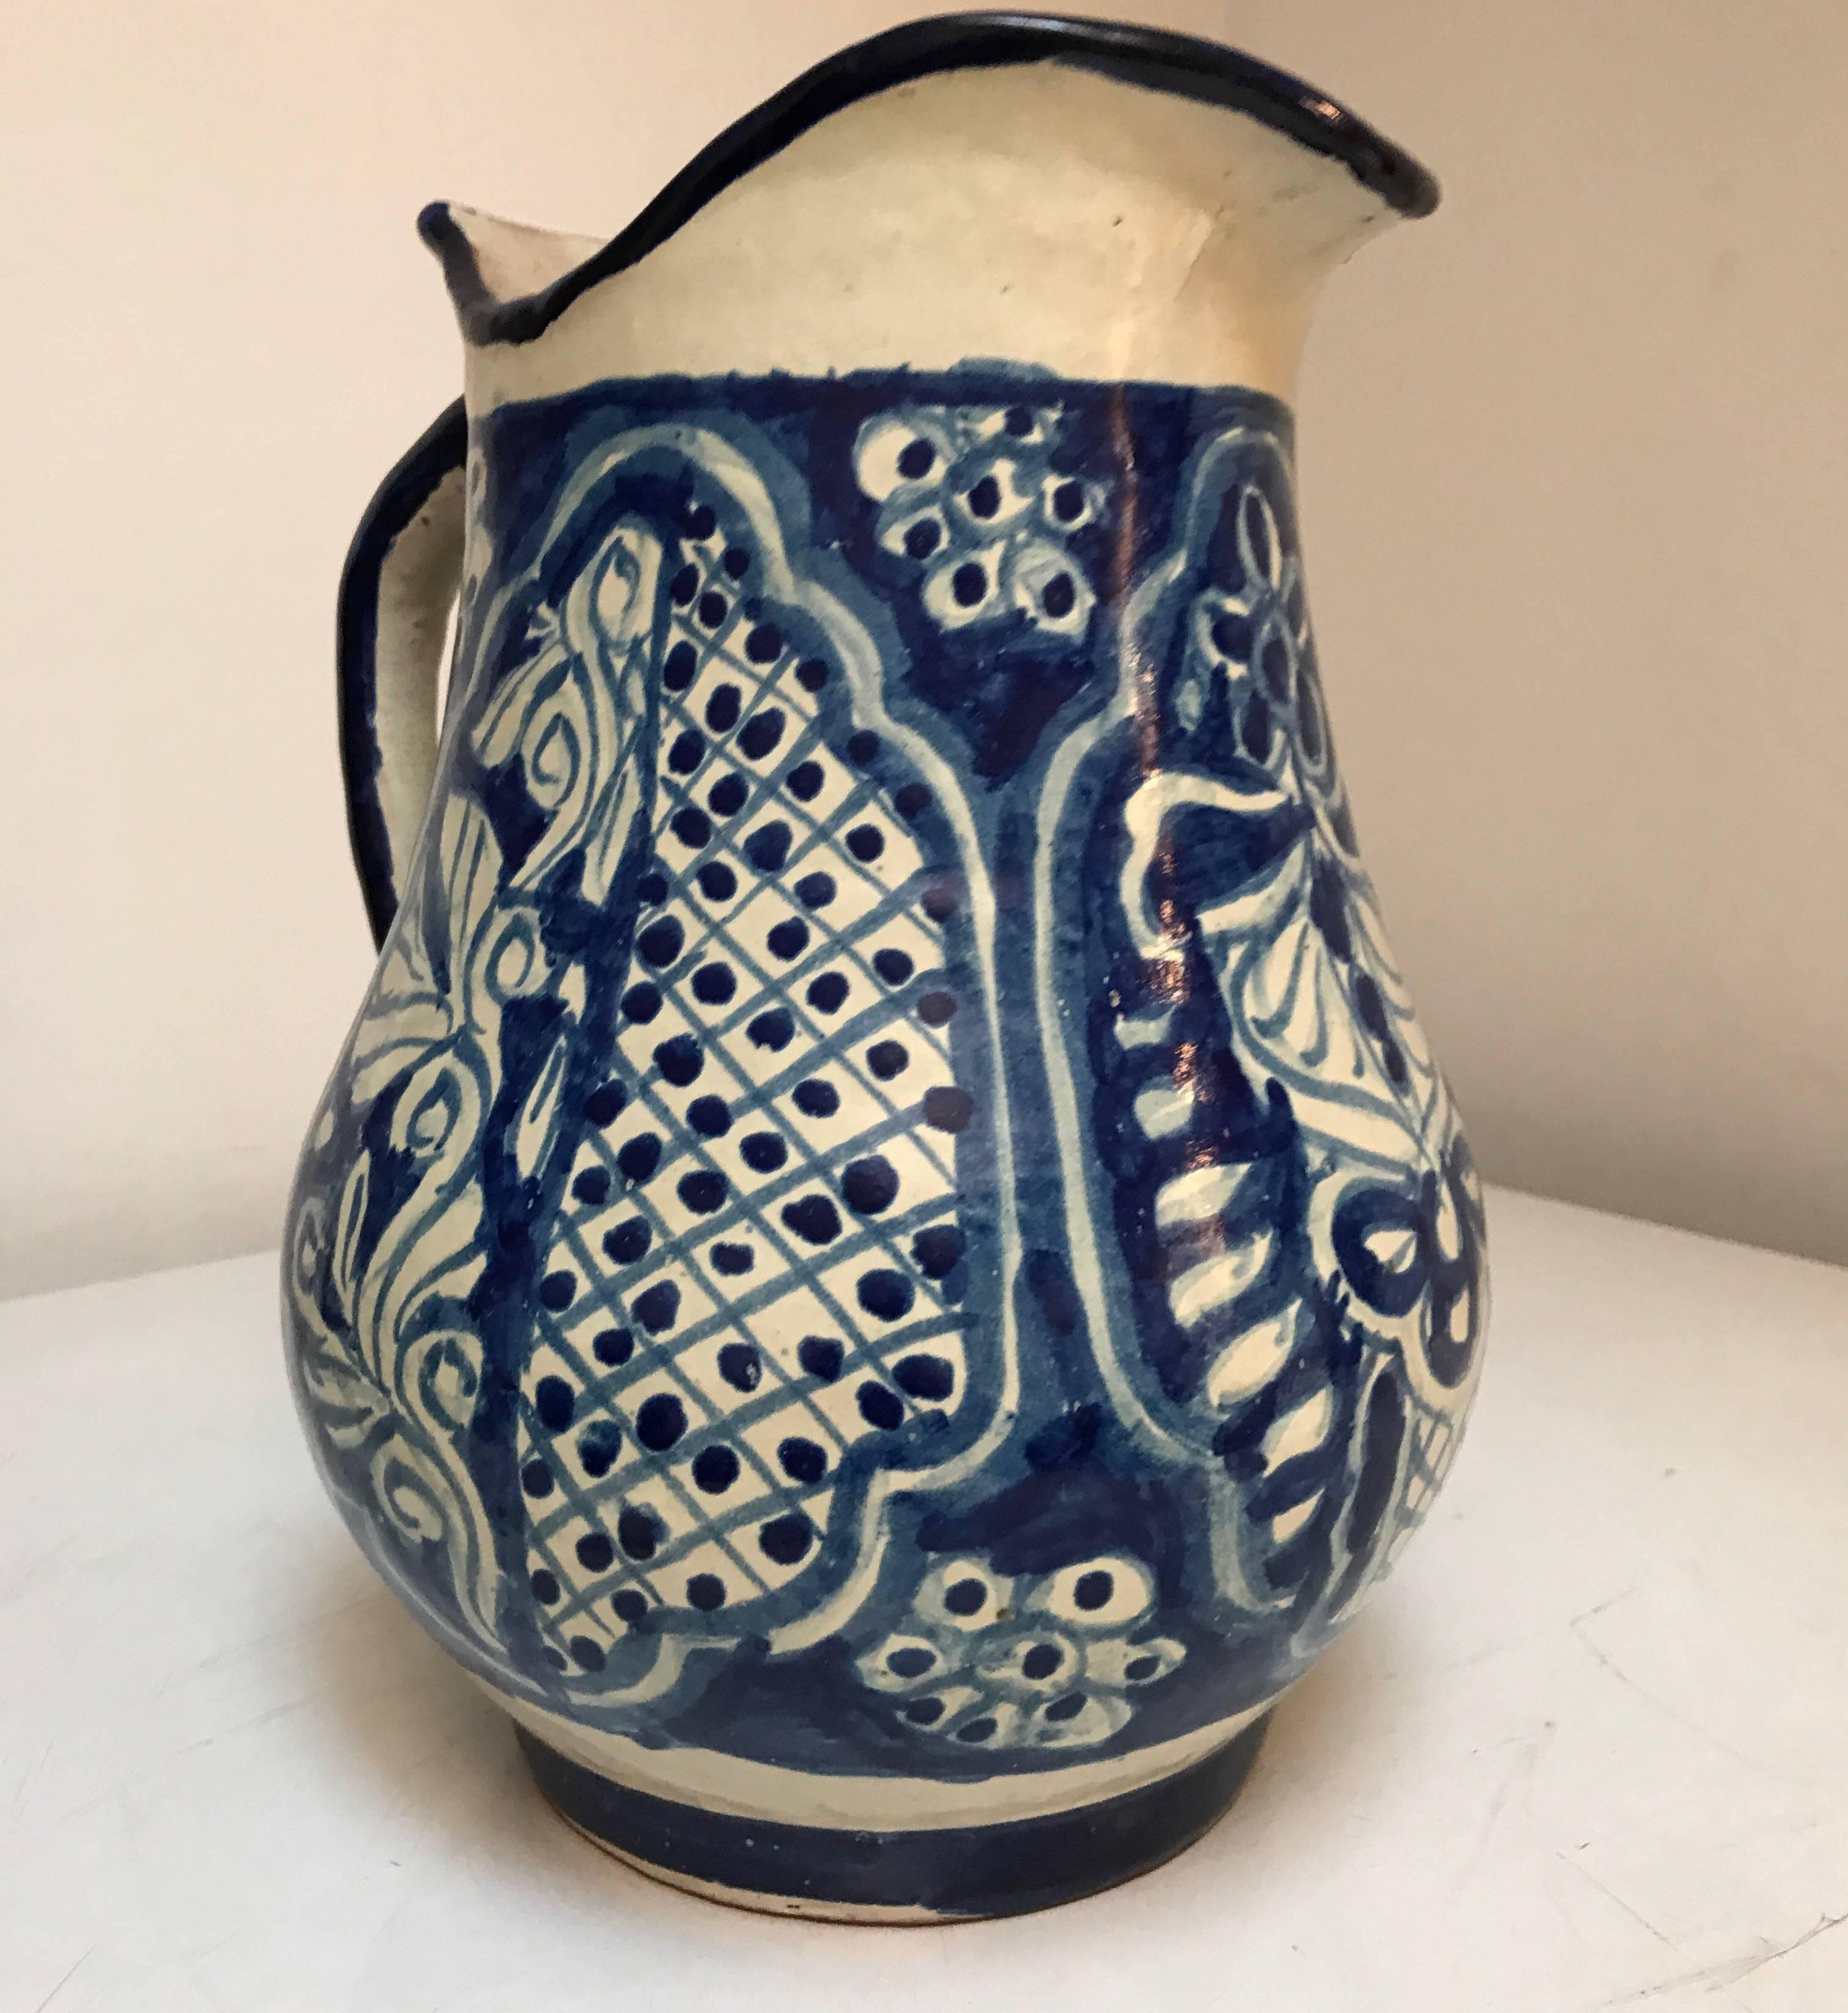 20th Century Large Ceramic Mexican Blue and White Talavera Pitcher